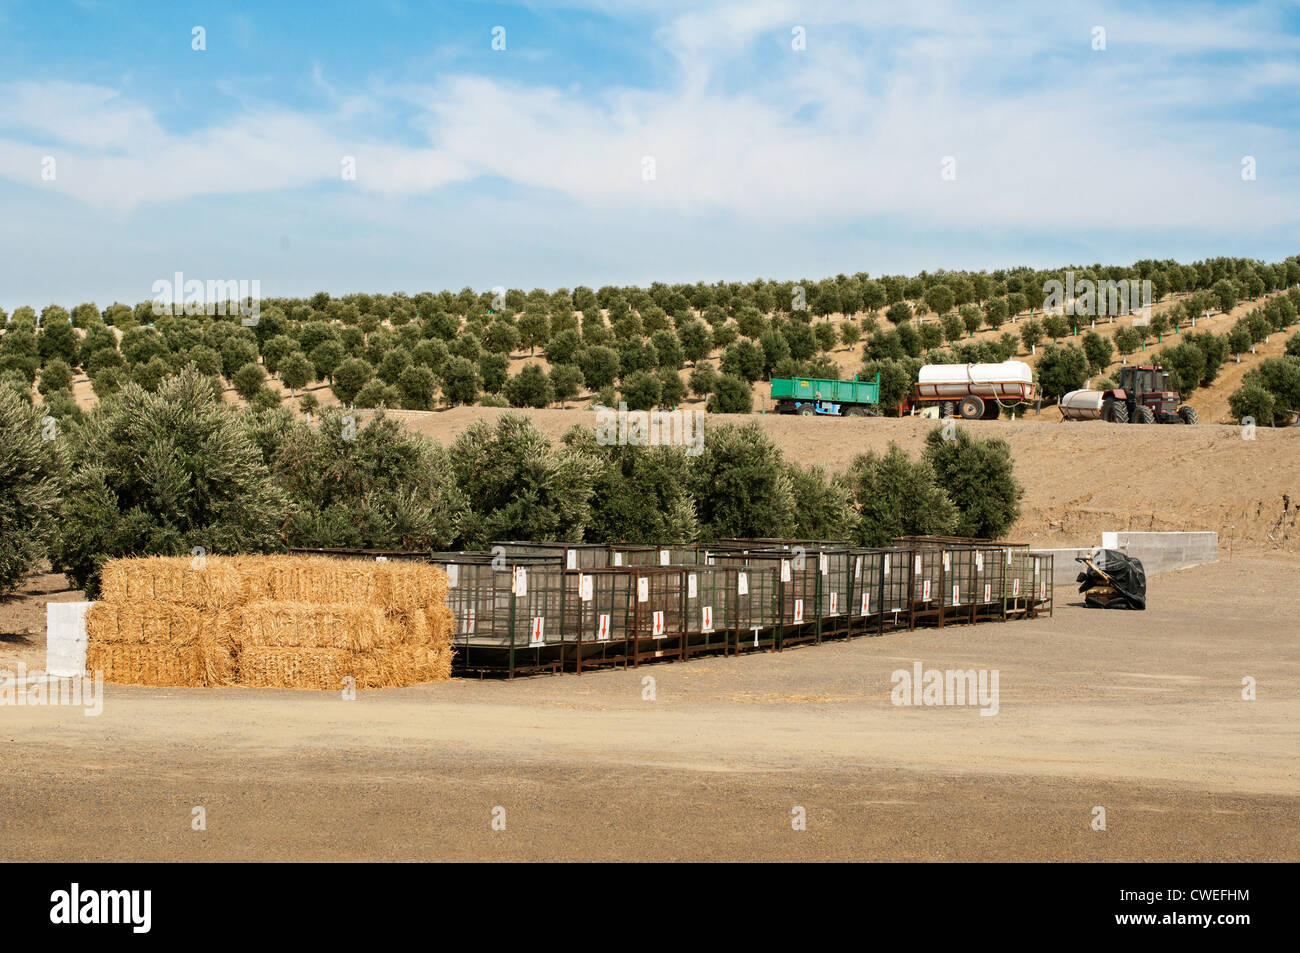 Olive plantation.Tractors and machinery Stock Photo